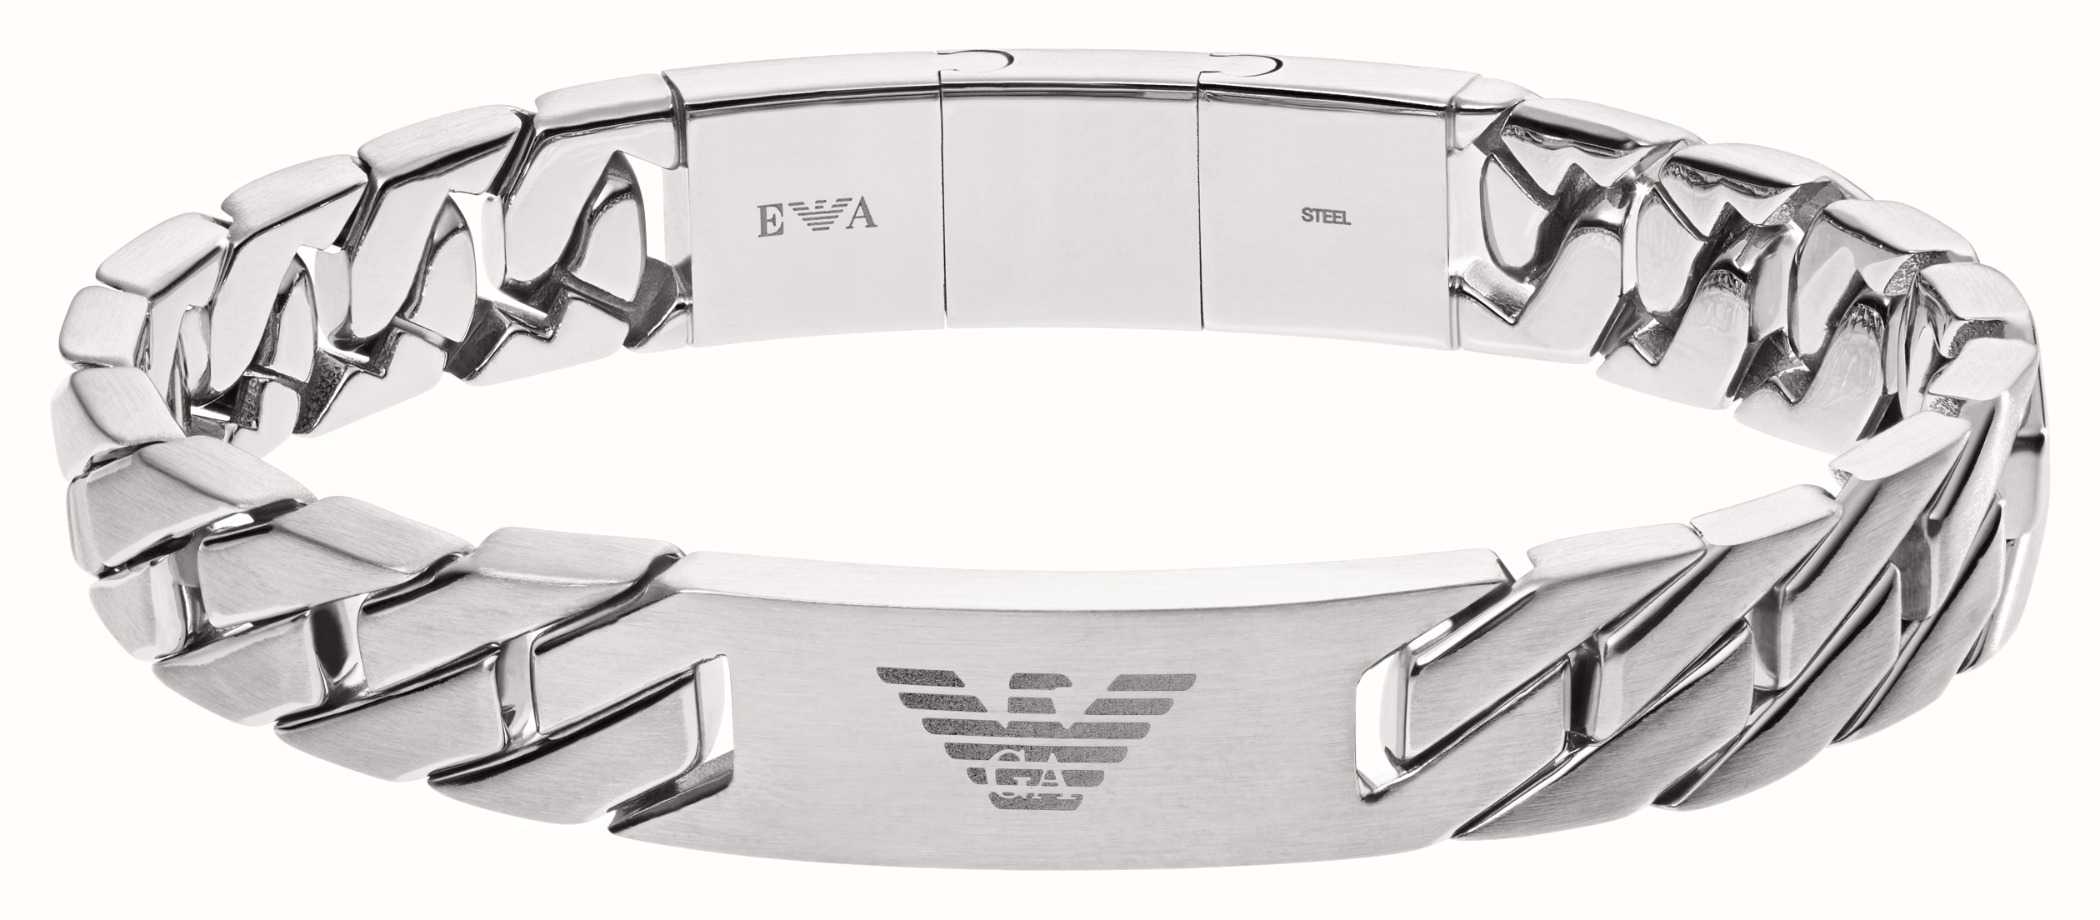 Watches™ Men\'s First EGS2435040 Stainless Steel Armani Class - Logo Bracelet Emporio